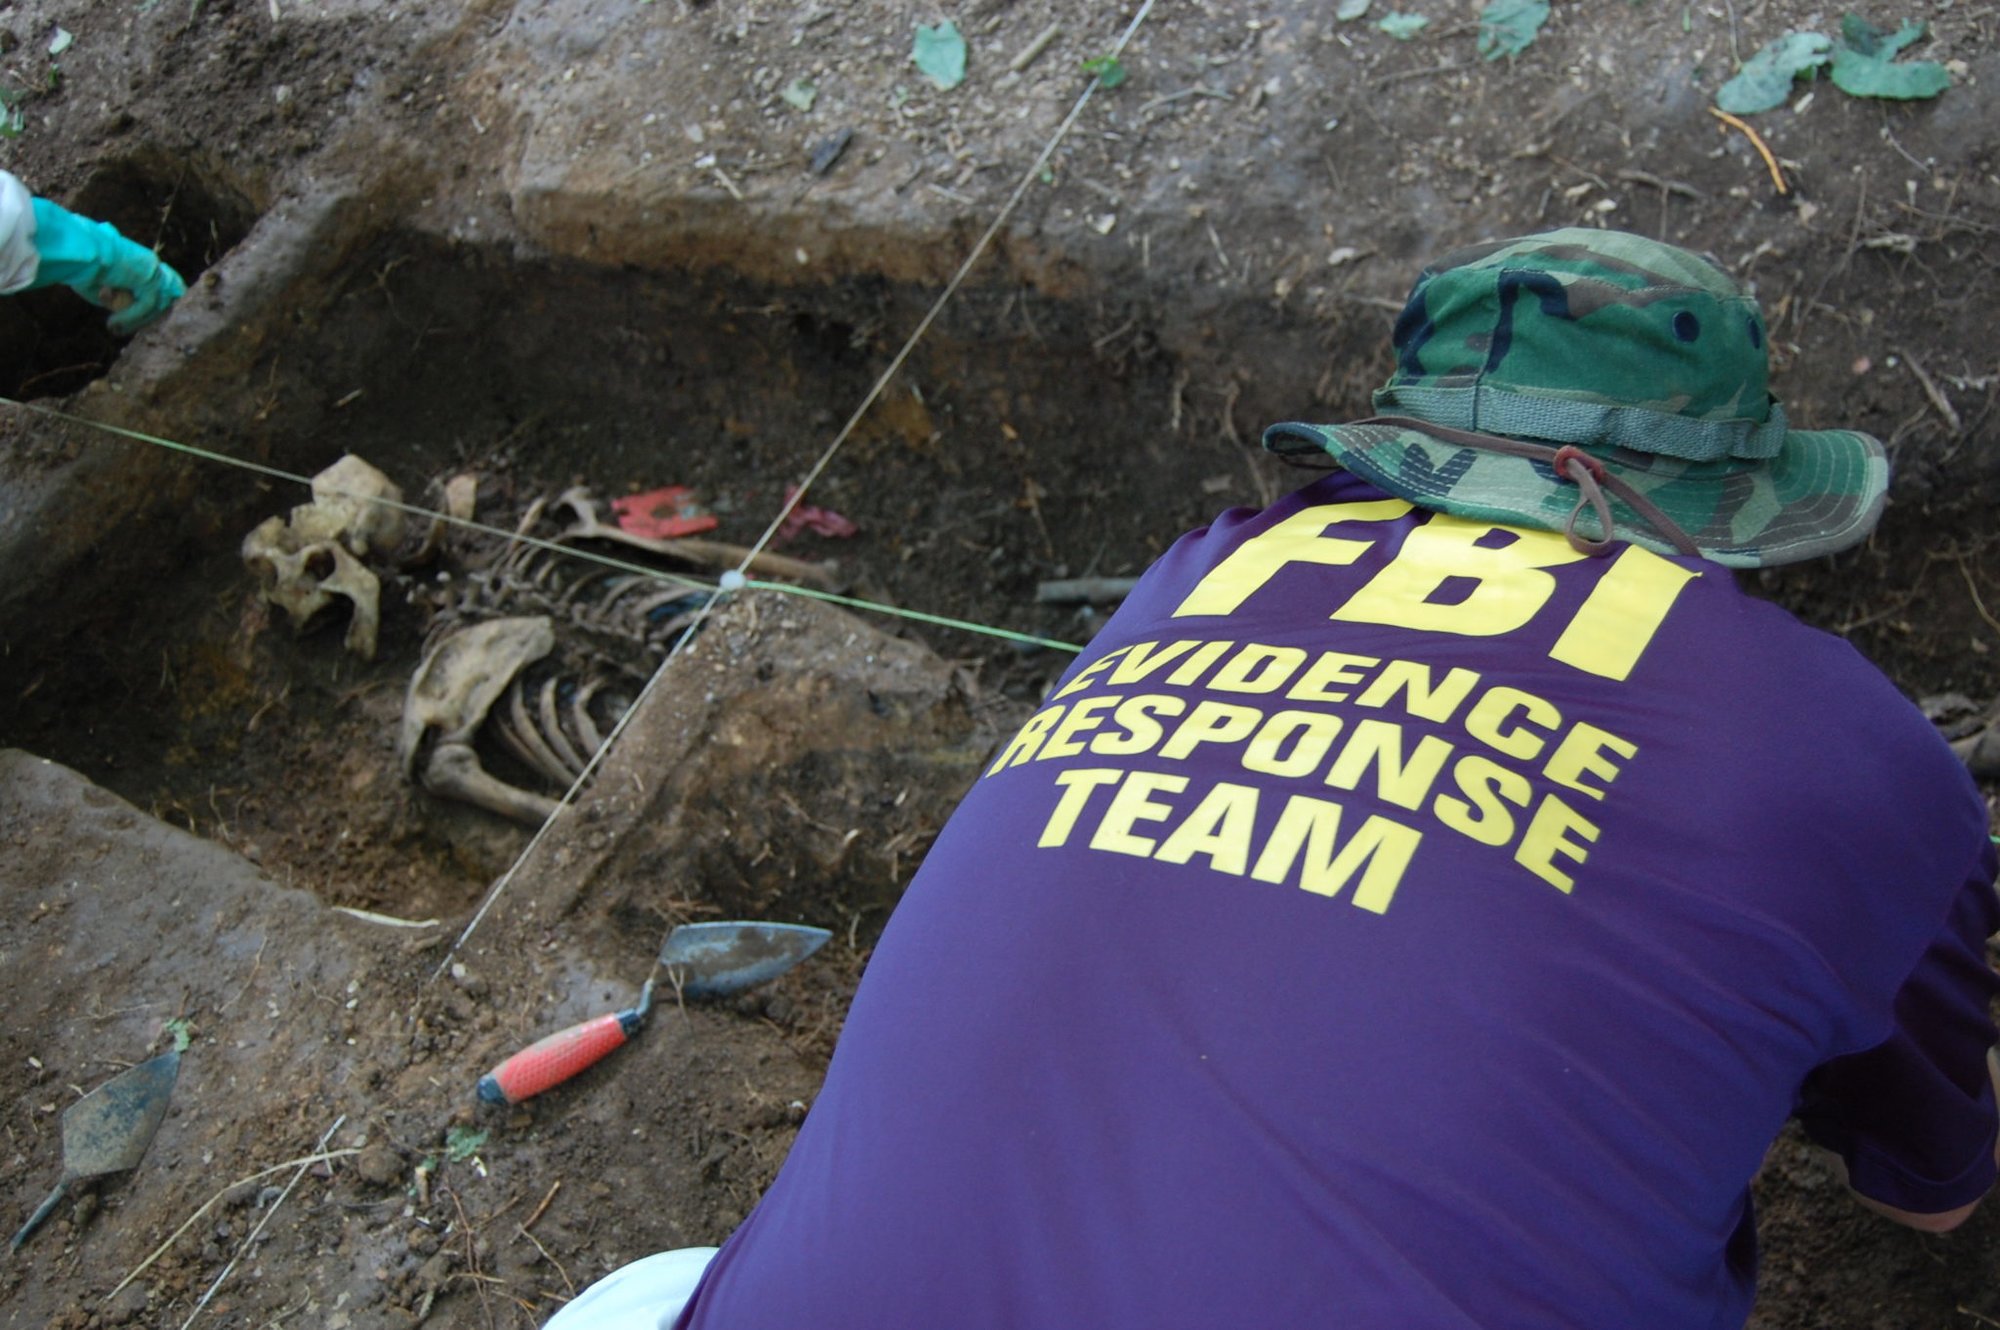 A student excavates a shallow grave at the Body Farm in Knoxville, Tennessee. Photo courtesy of FBI.gov